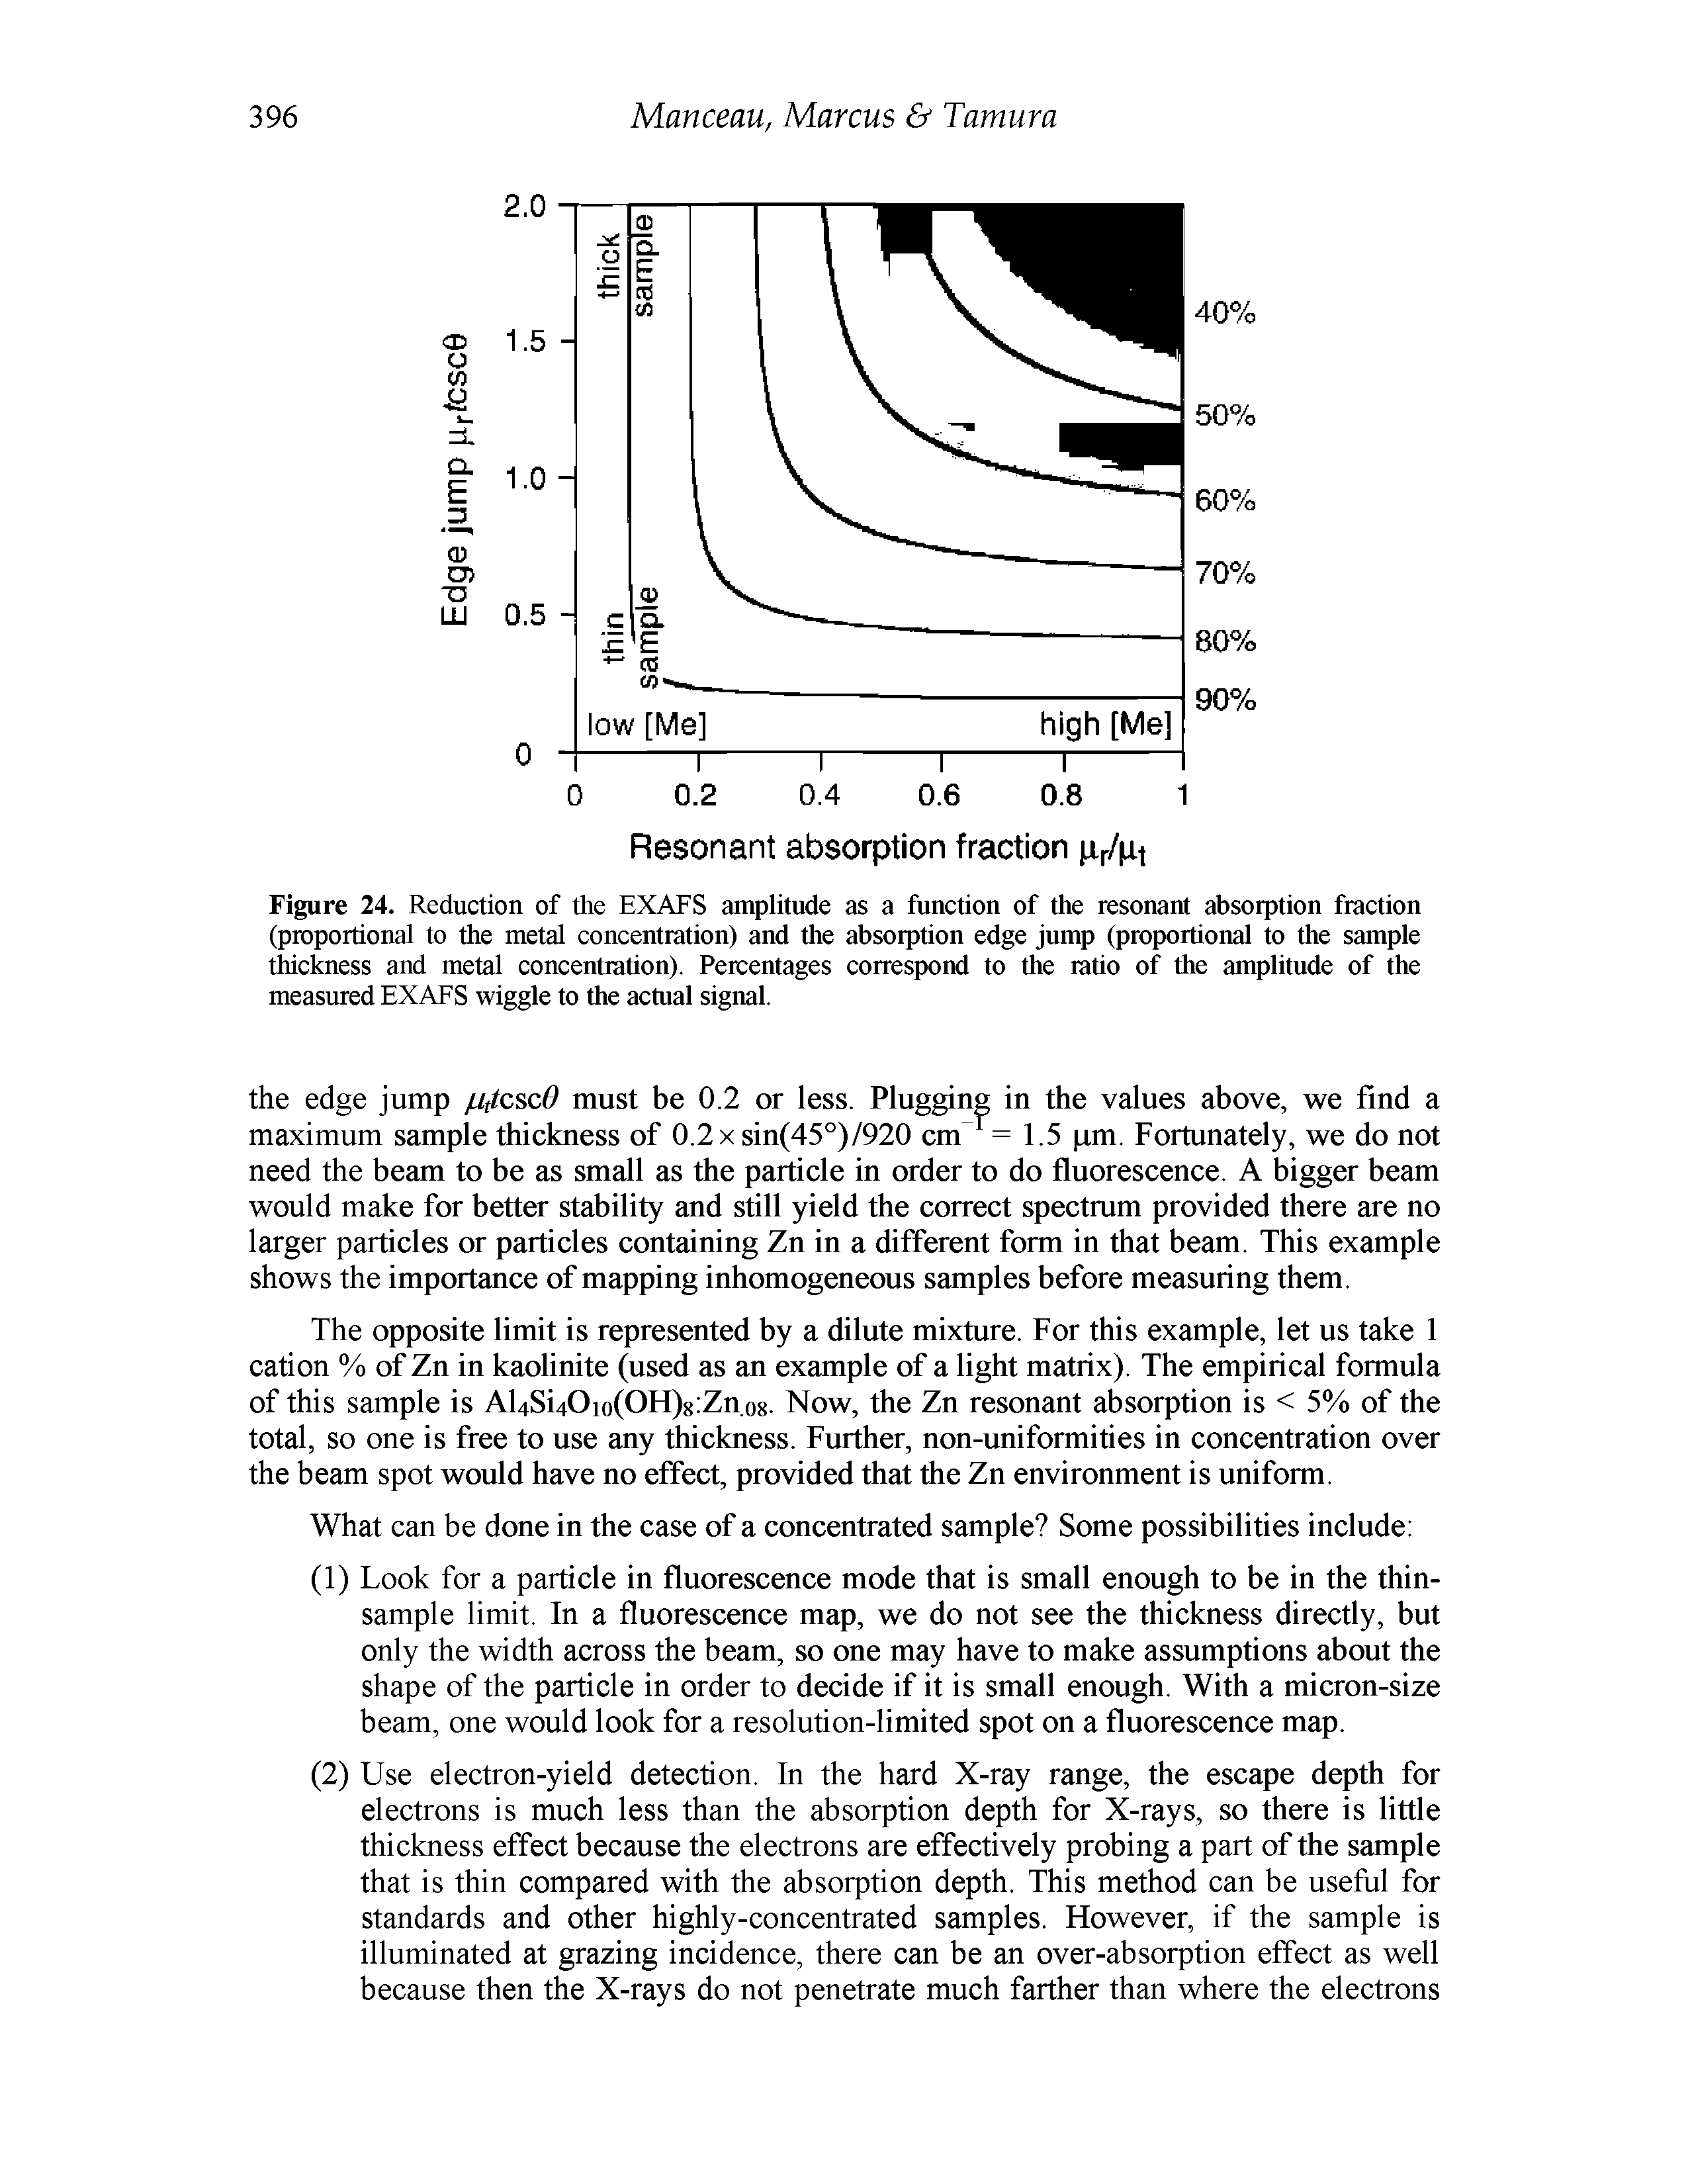 Figure 24. Reduction of the EXAFS amplitude as a function of the resonant absorption fraction (proportional to the metal concentration) and the absorption edge jump (proportional to the sample thickness and metal concentration). Percentages correspond to the ratio of the amplitude of the...